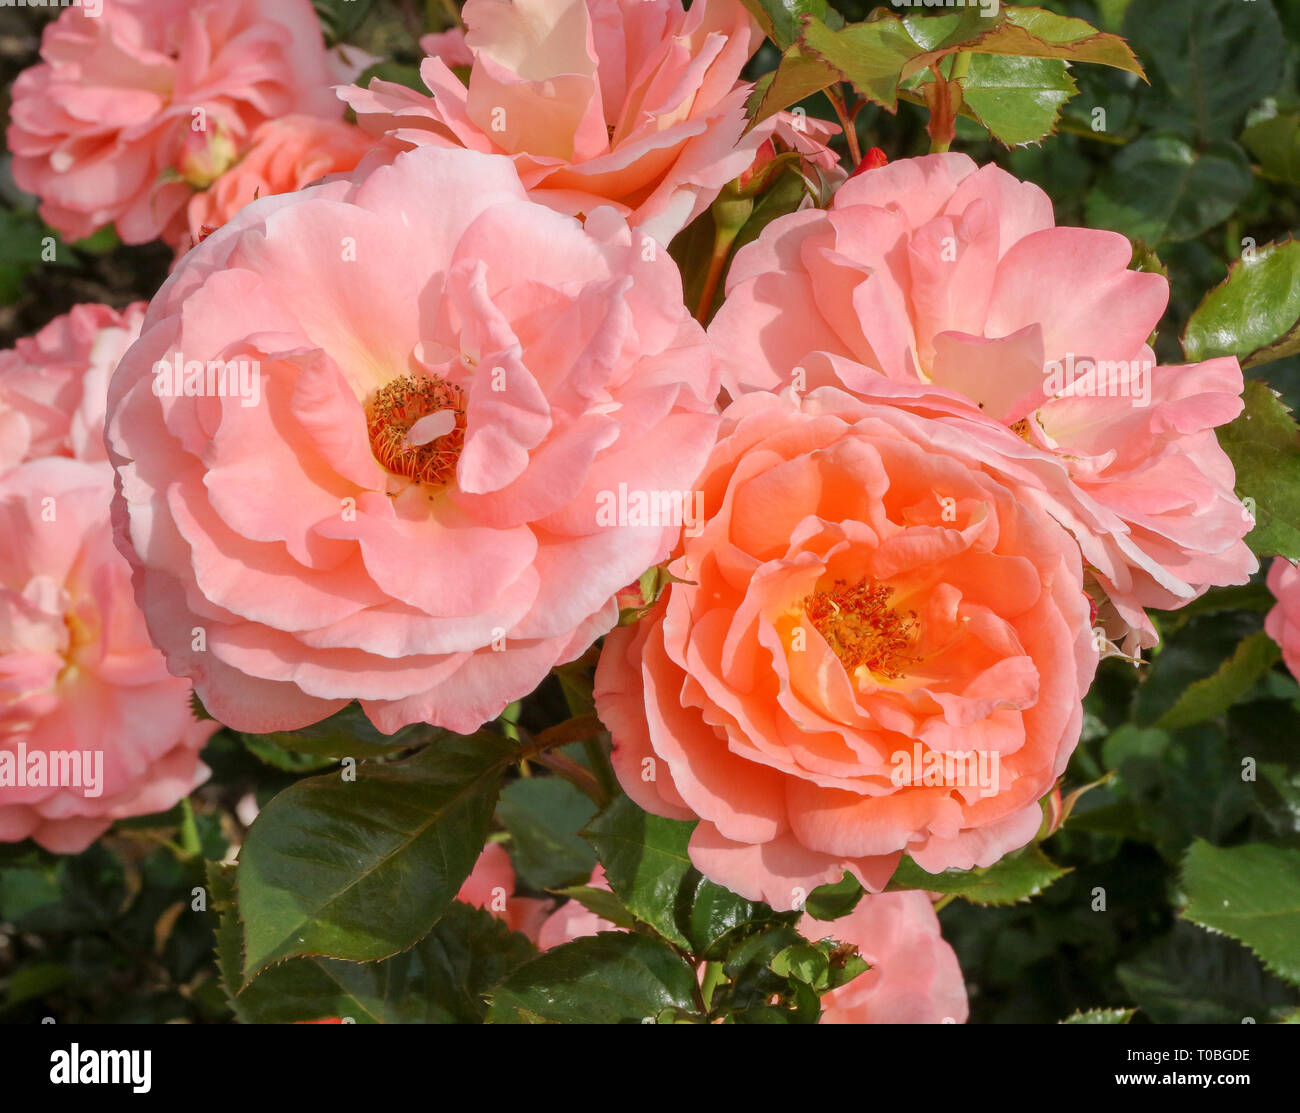 Bonita Rose High Resolution Stock Photography and Images - Alamy